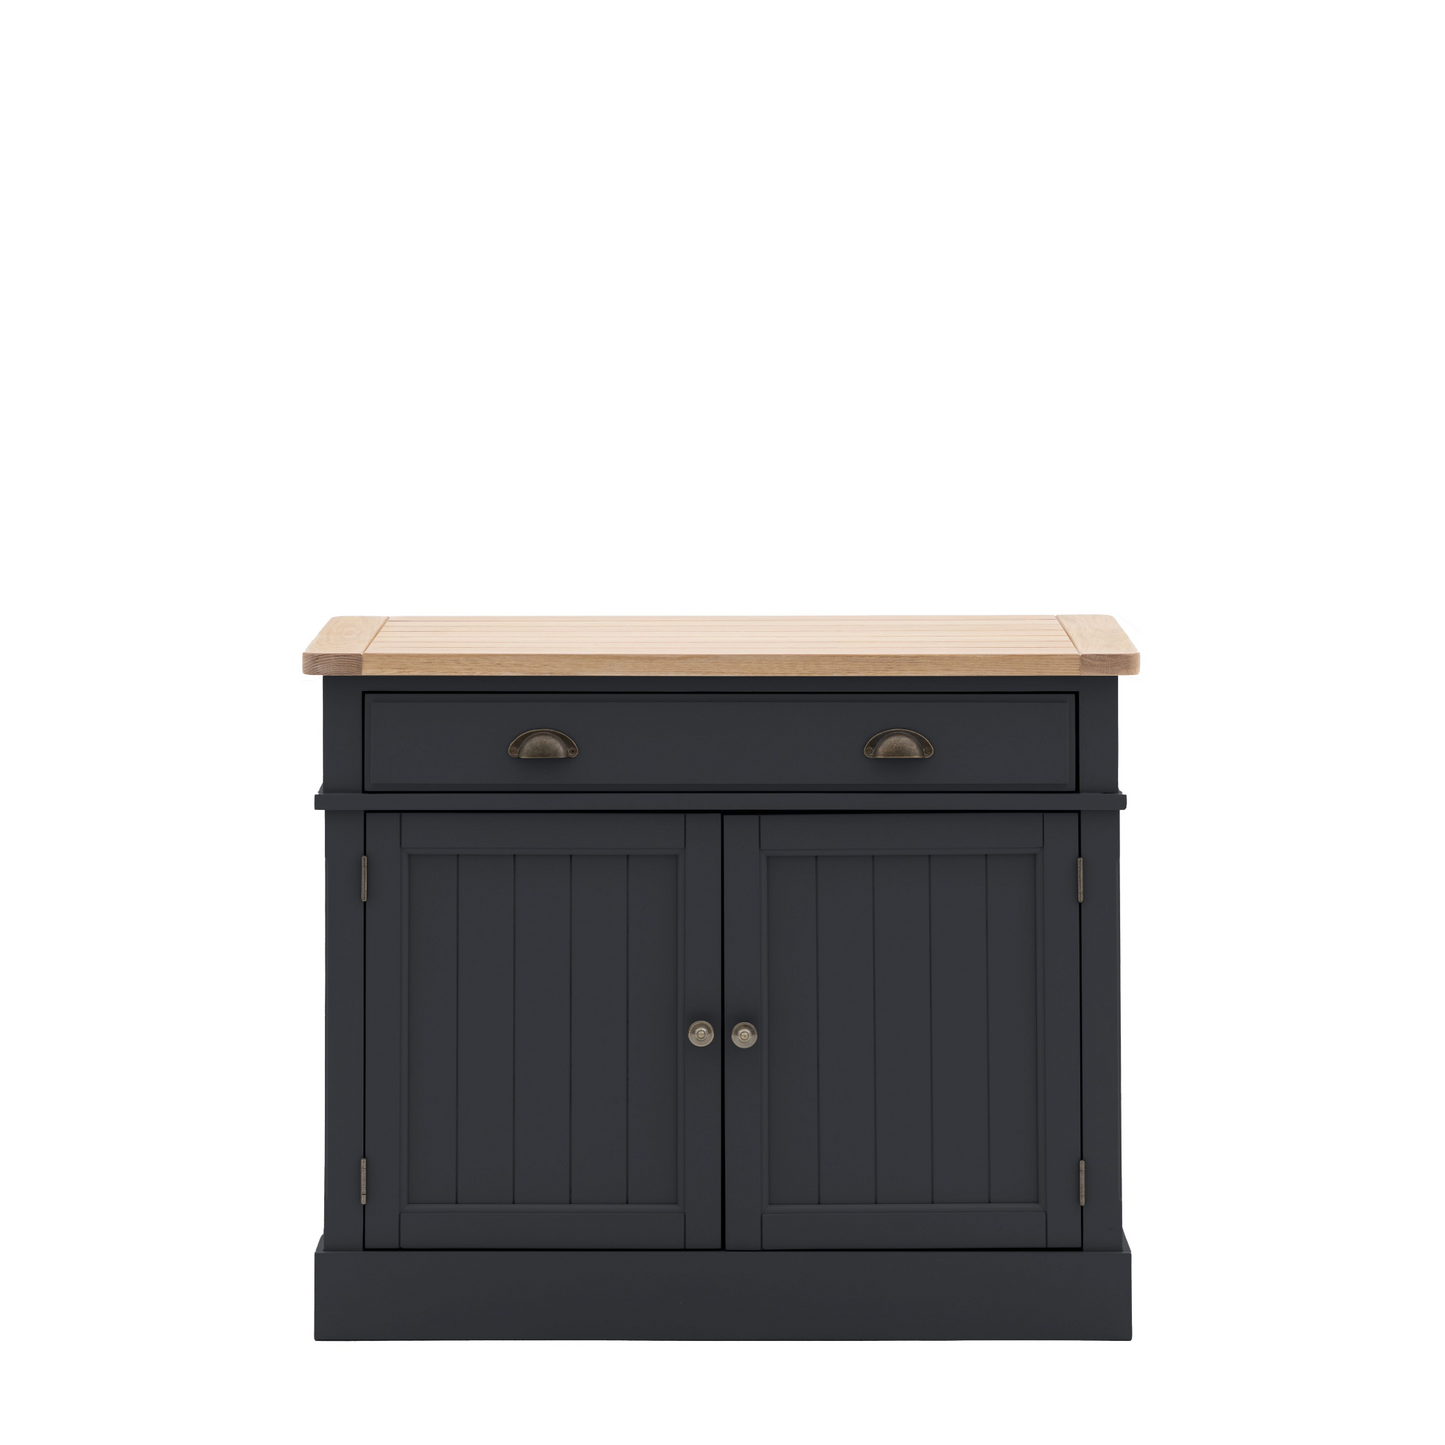 A Buckland 2 Door 1 Drawer Sideboard in Meteor from Kikiathome.co.uk for home furniture and interior decor.